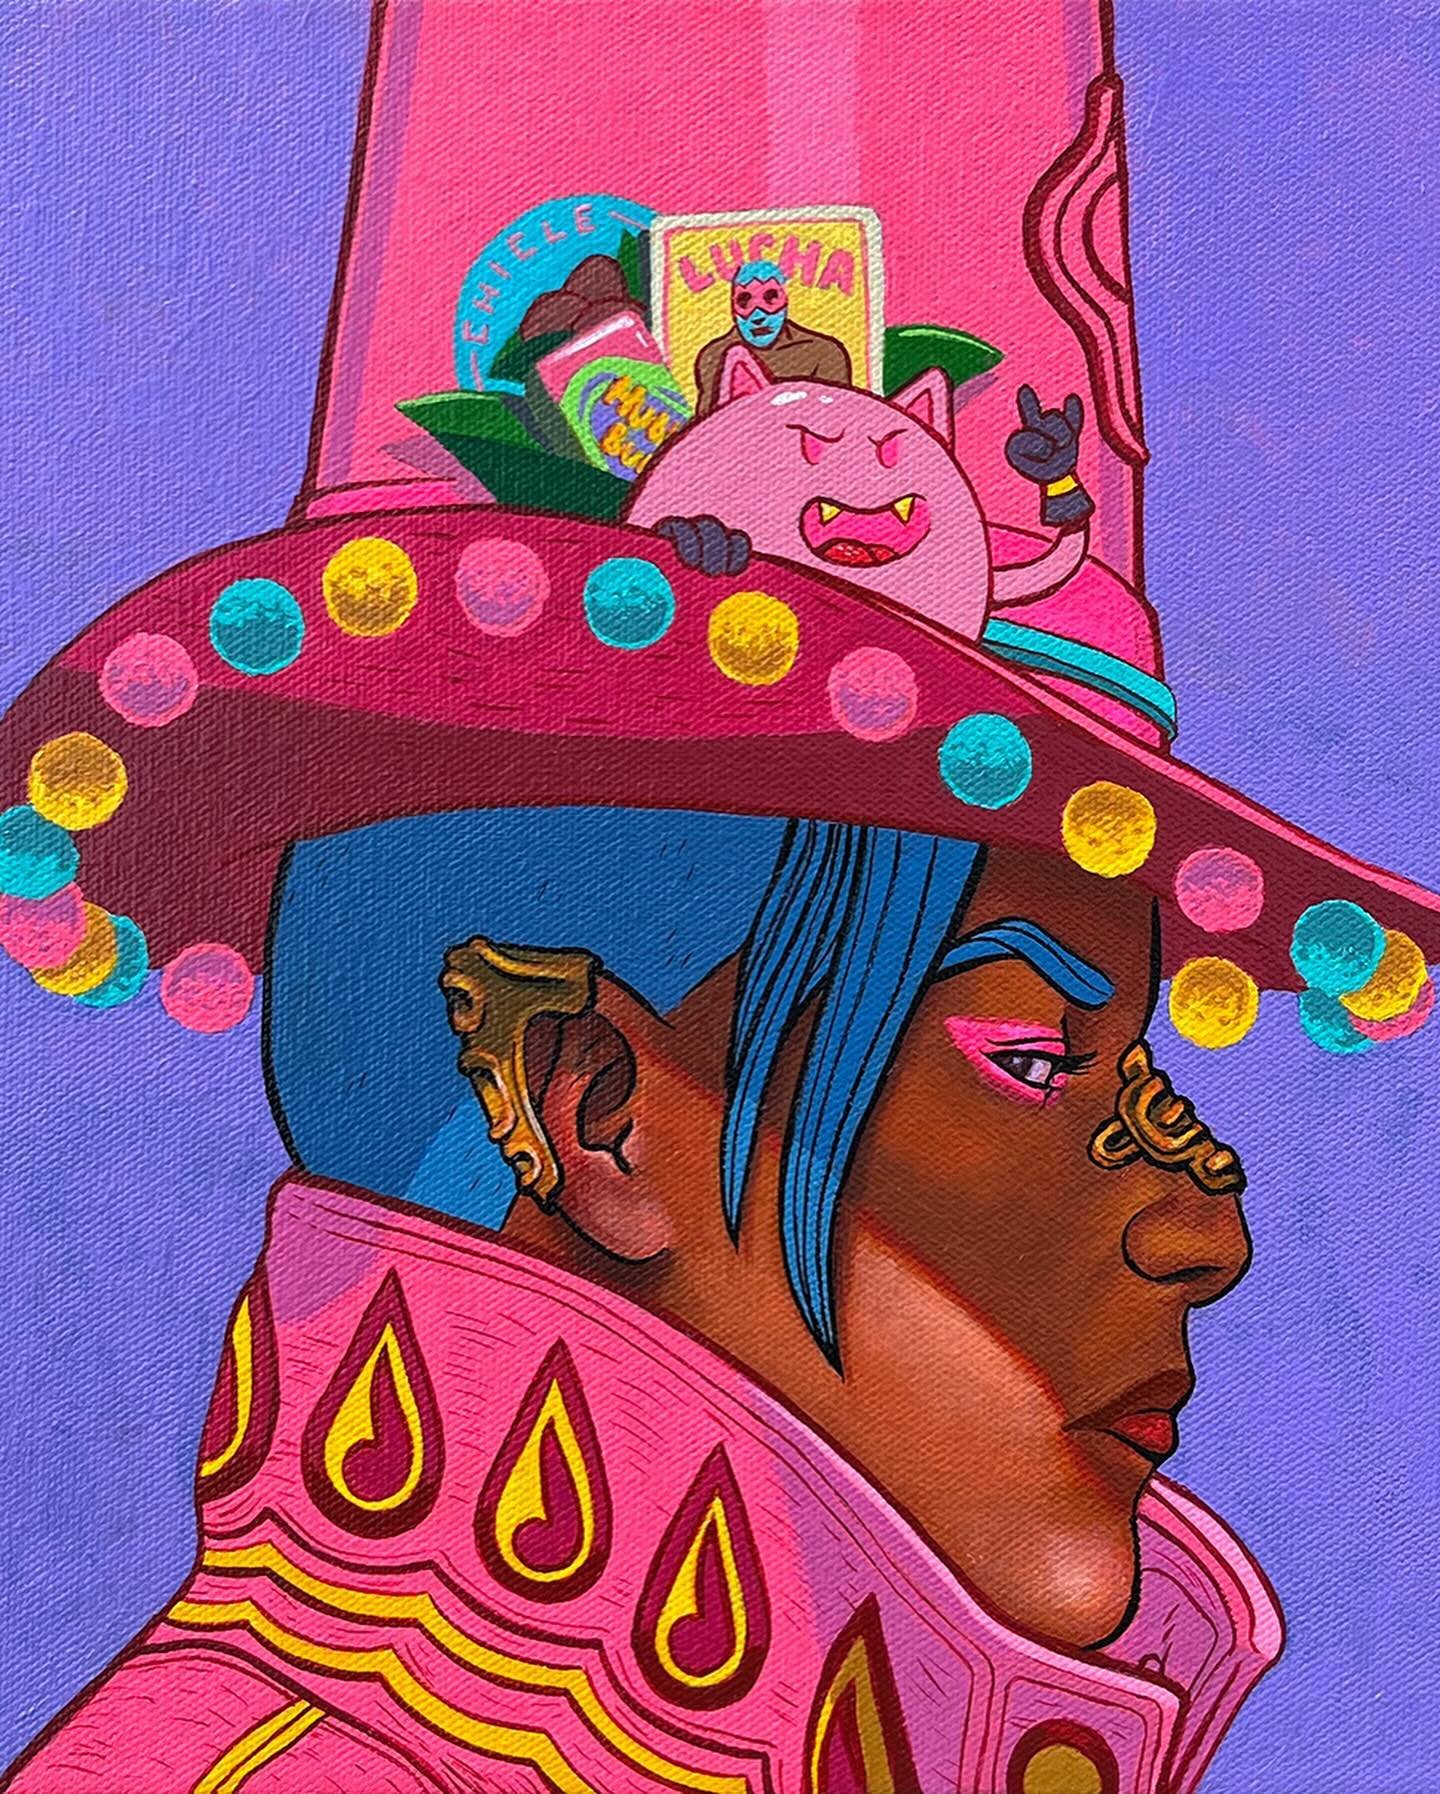 Newly finished piece. This one is titled Chicle, for the fanged tooth little friend in the brim of her hat. The world &ldquo;chicle&rdquo;, which is written in the blue circle on her hat, is the Spanish word for gum. Within this blue circle is a tree